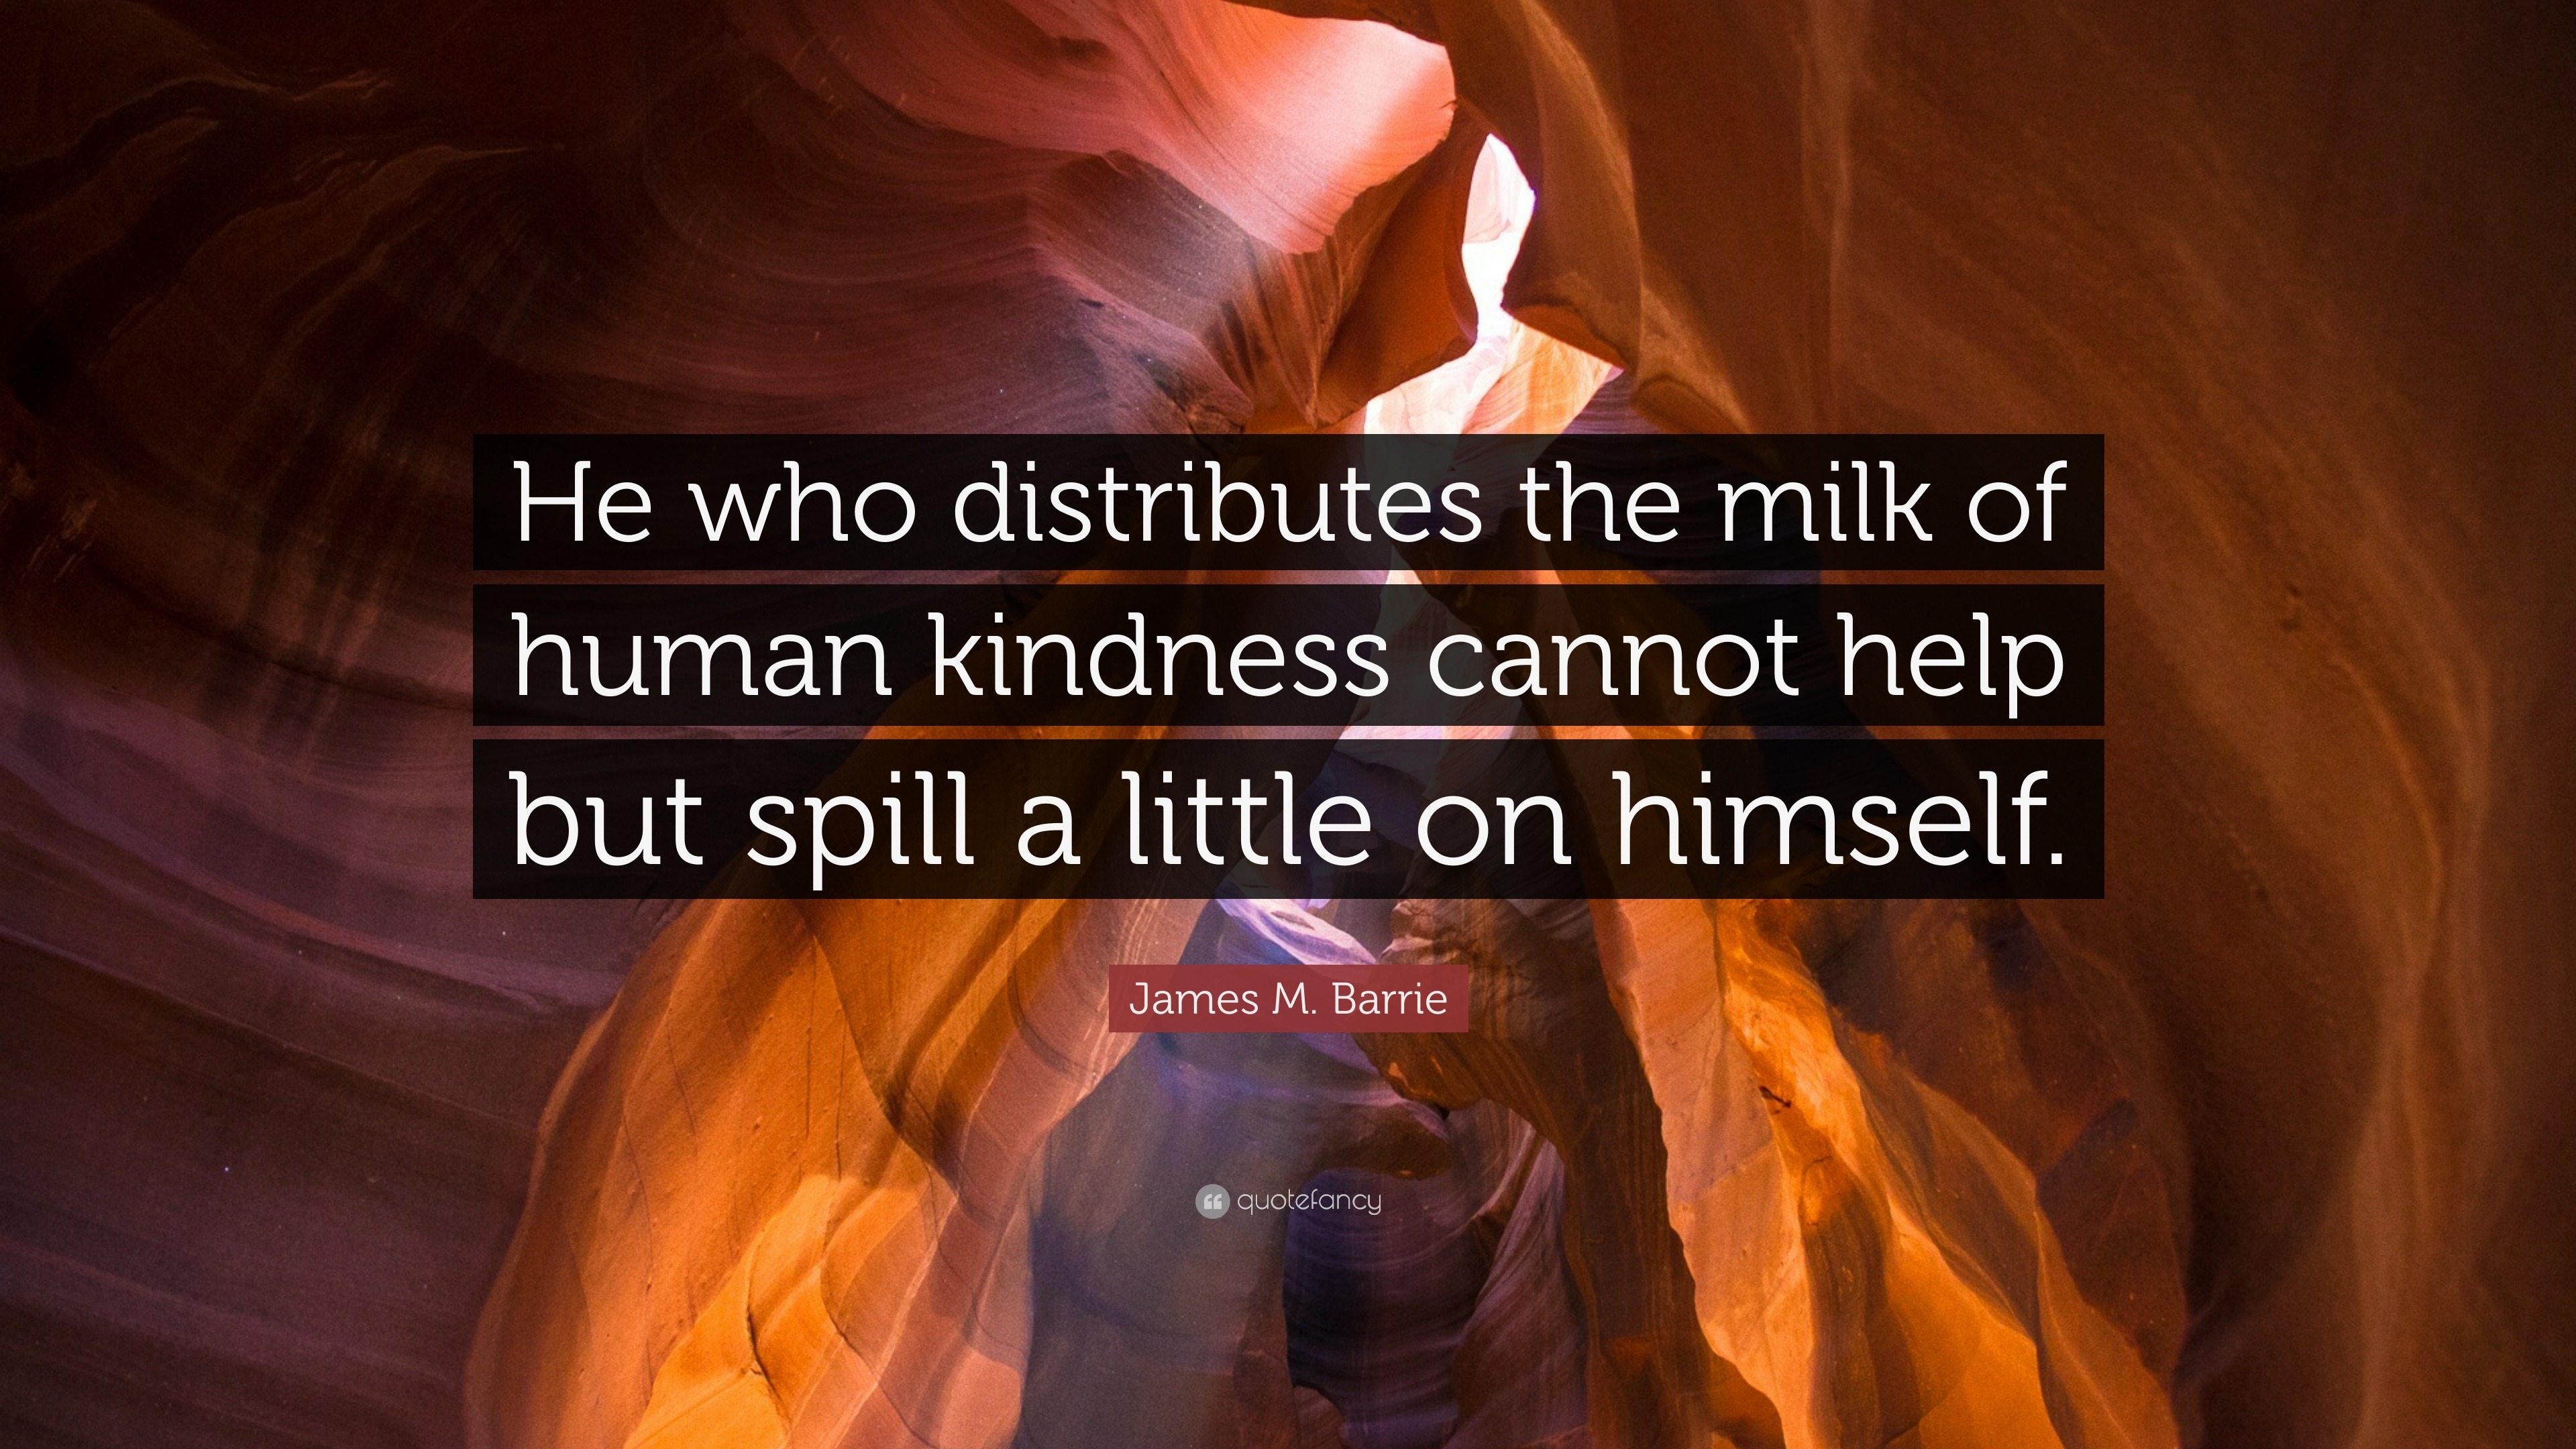 Milk of human kindness - the meaning and origin of this